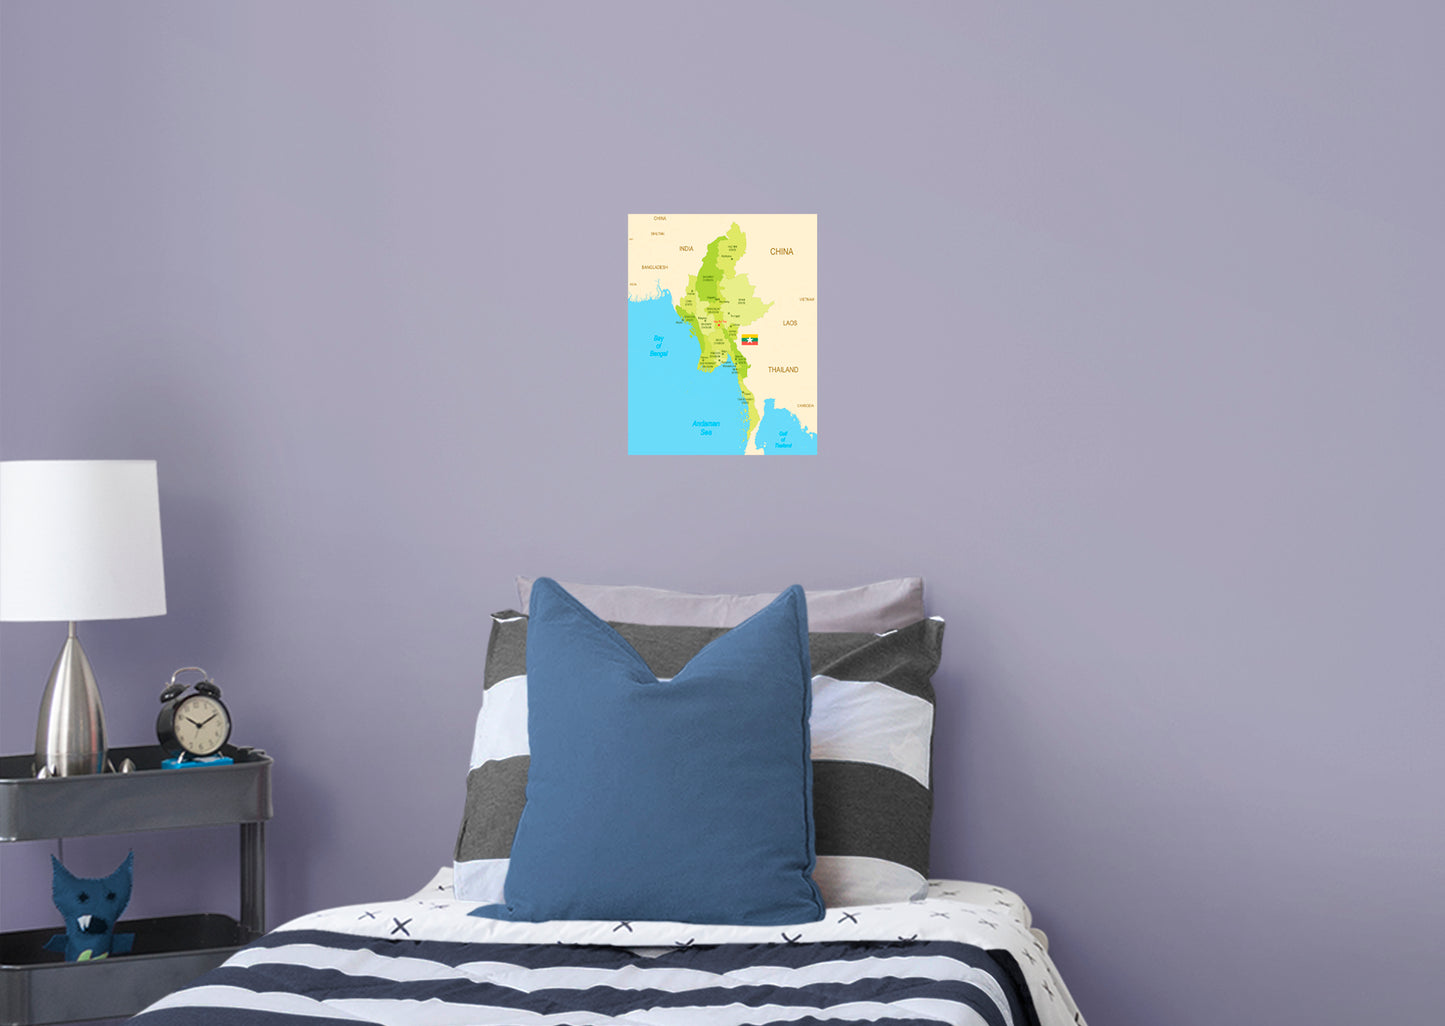 Maps of Asia: Myanmar Mural        -   Removable Wall   Adhesive Decal